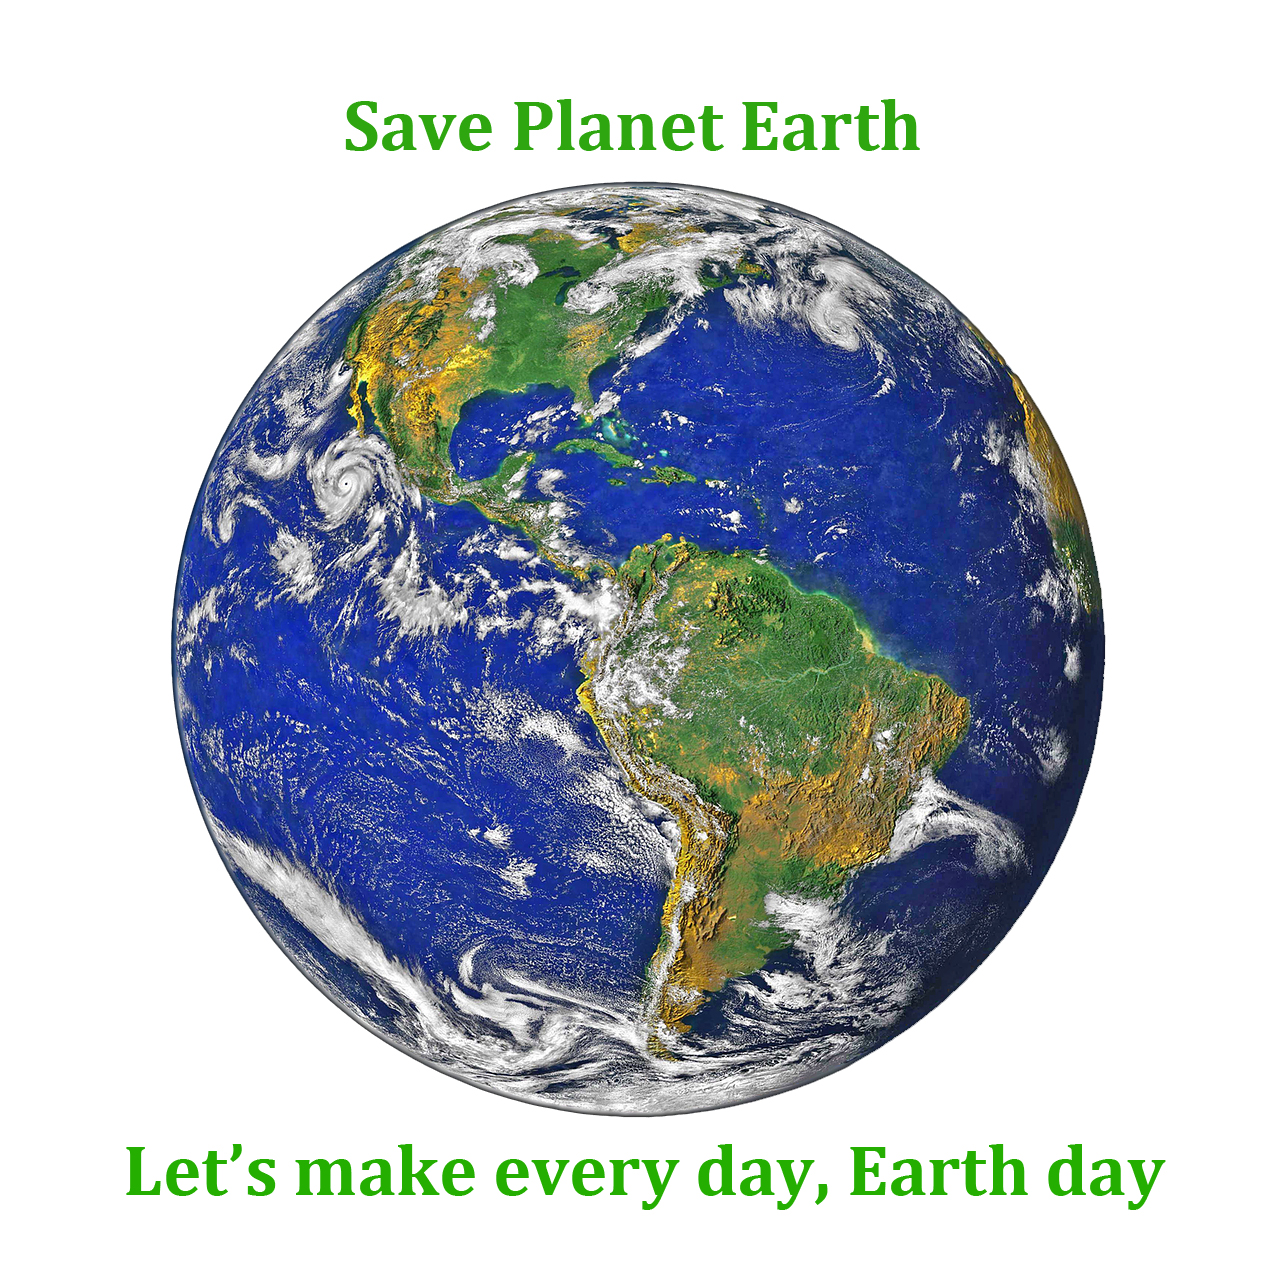 Saving planet earth is our responsibility, you and I